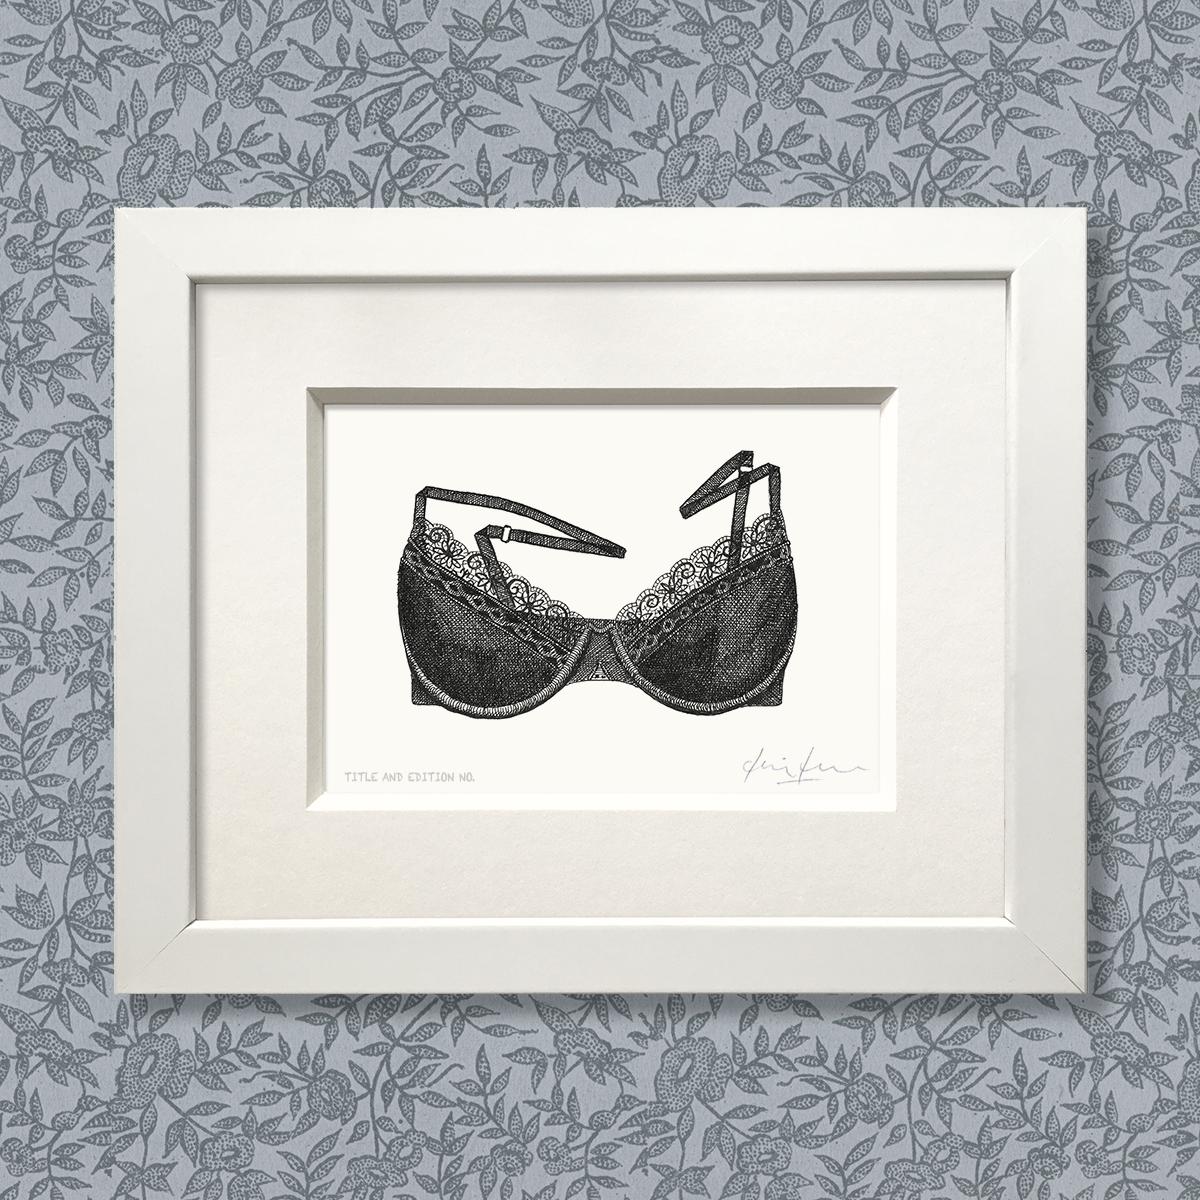 Limited edition print from pen and ink drawing of a lacy bra in a white frame